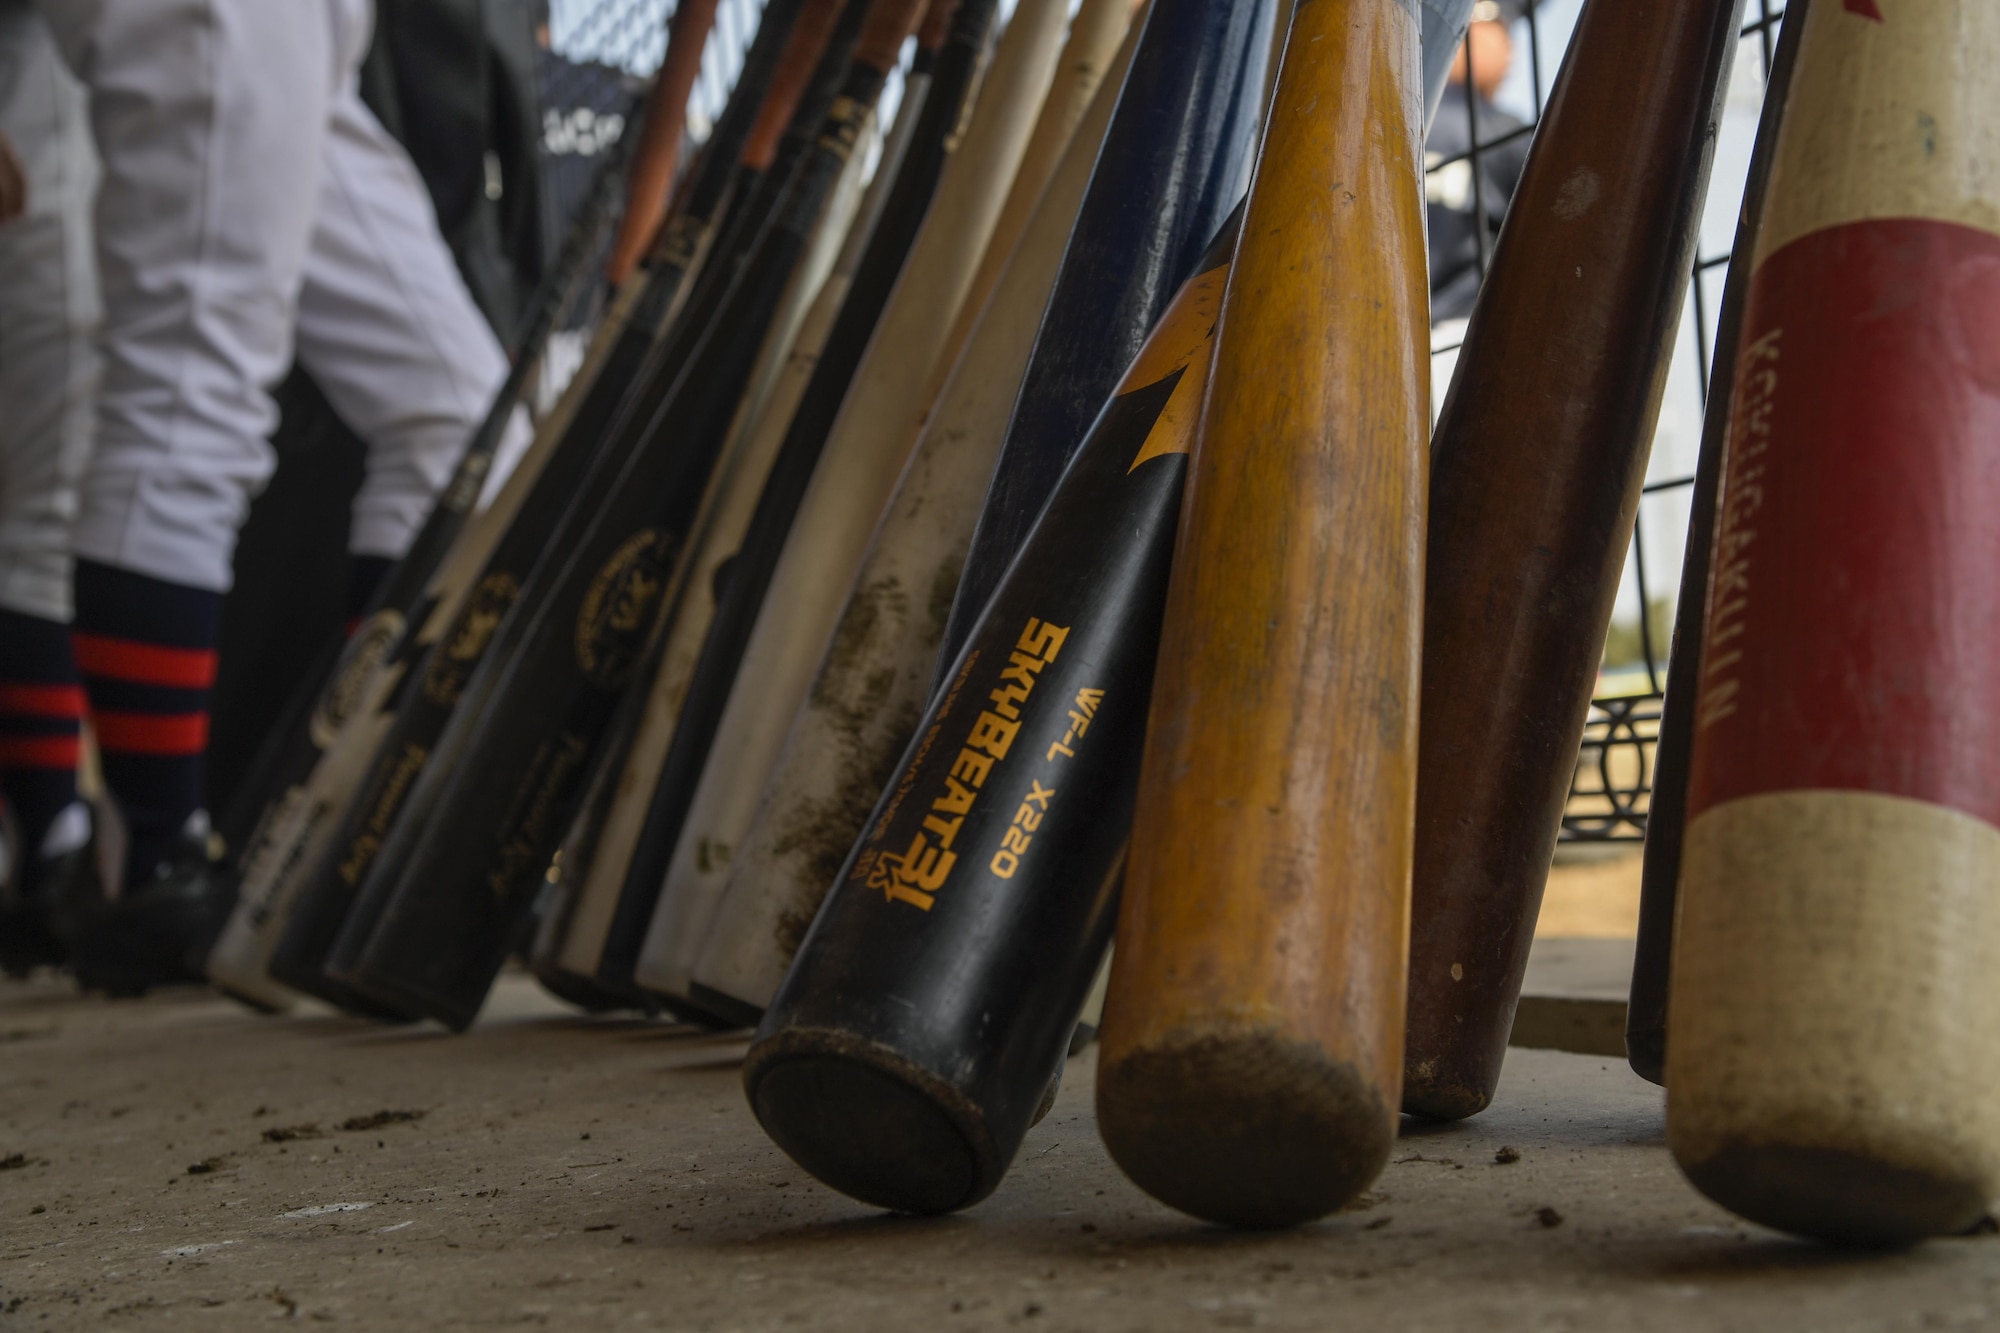 Bats sit in the Chofu Little Seniors dugout during the Inaugural Japan-US Friendship Youth Baseball Game at Yokota Air Base, Japan, March 25, 2017. The event marks the beginning of the spring baseball season on base and strengthened ties between the Yokota and Japanese youth through baseball. (U.S. Air Force photo by Staff Sgt. David Owsianka)